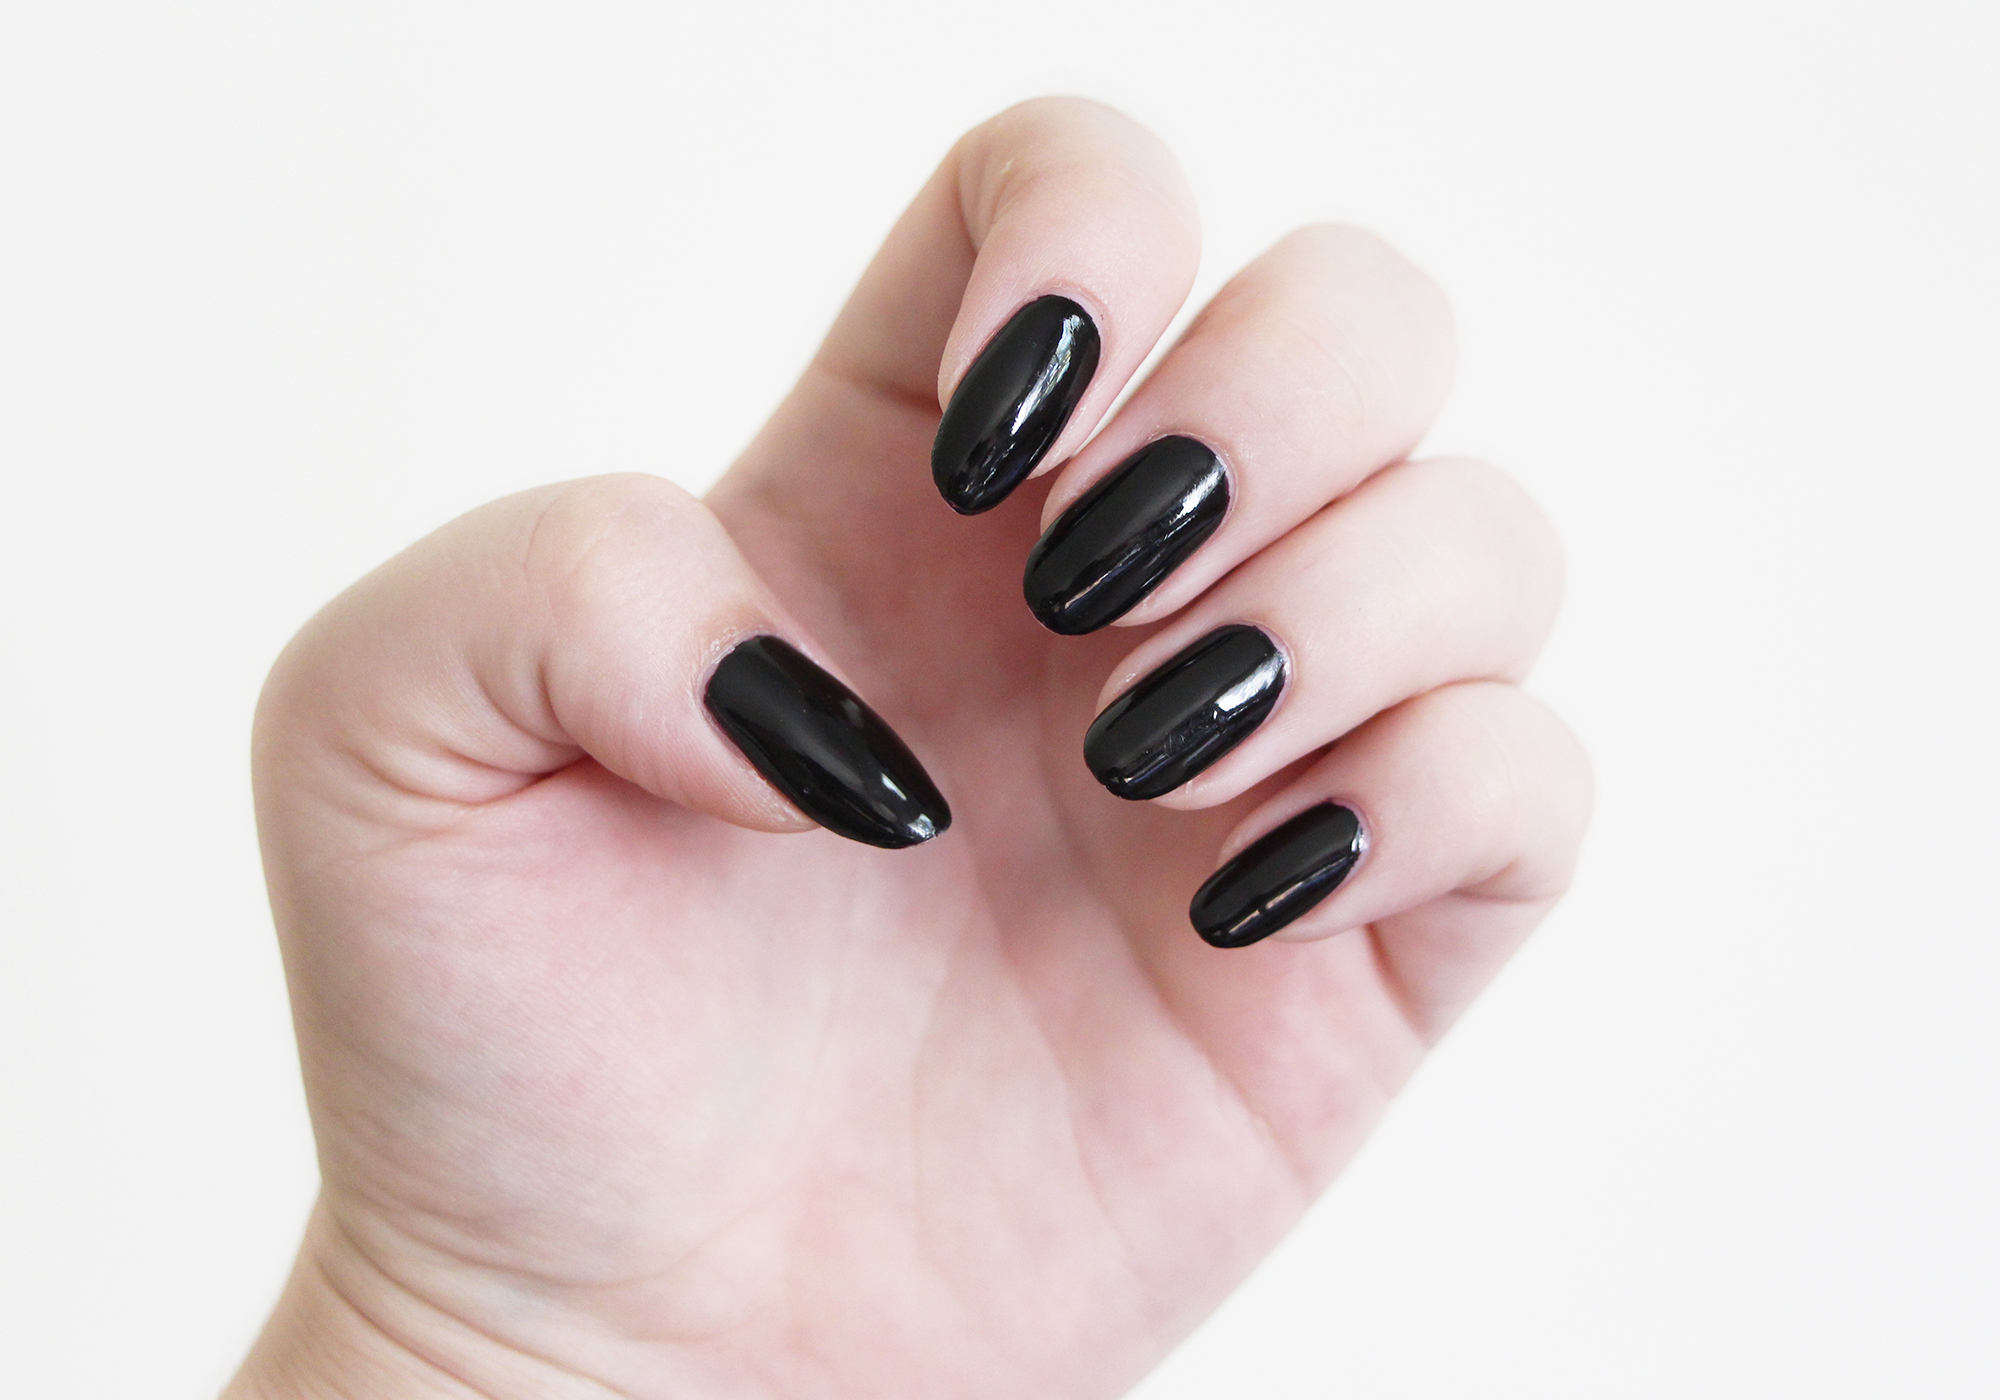 7. OPI Nail Lacquer in "Lincoln Park After Dark" - wide 10